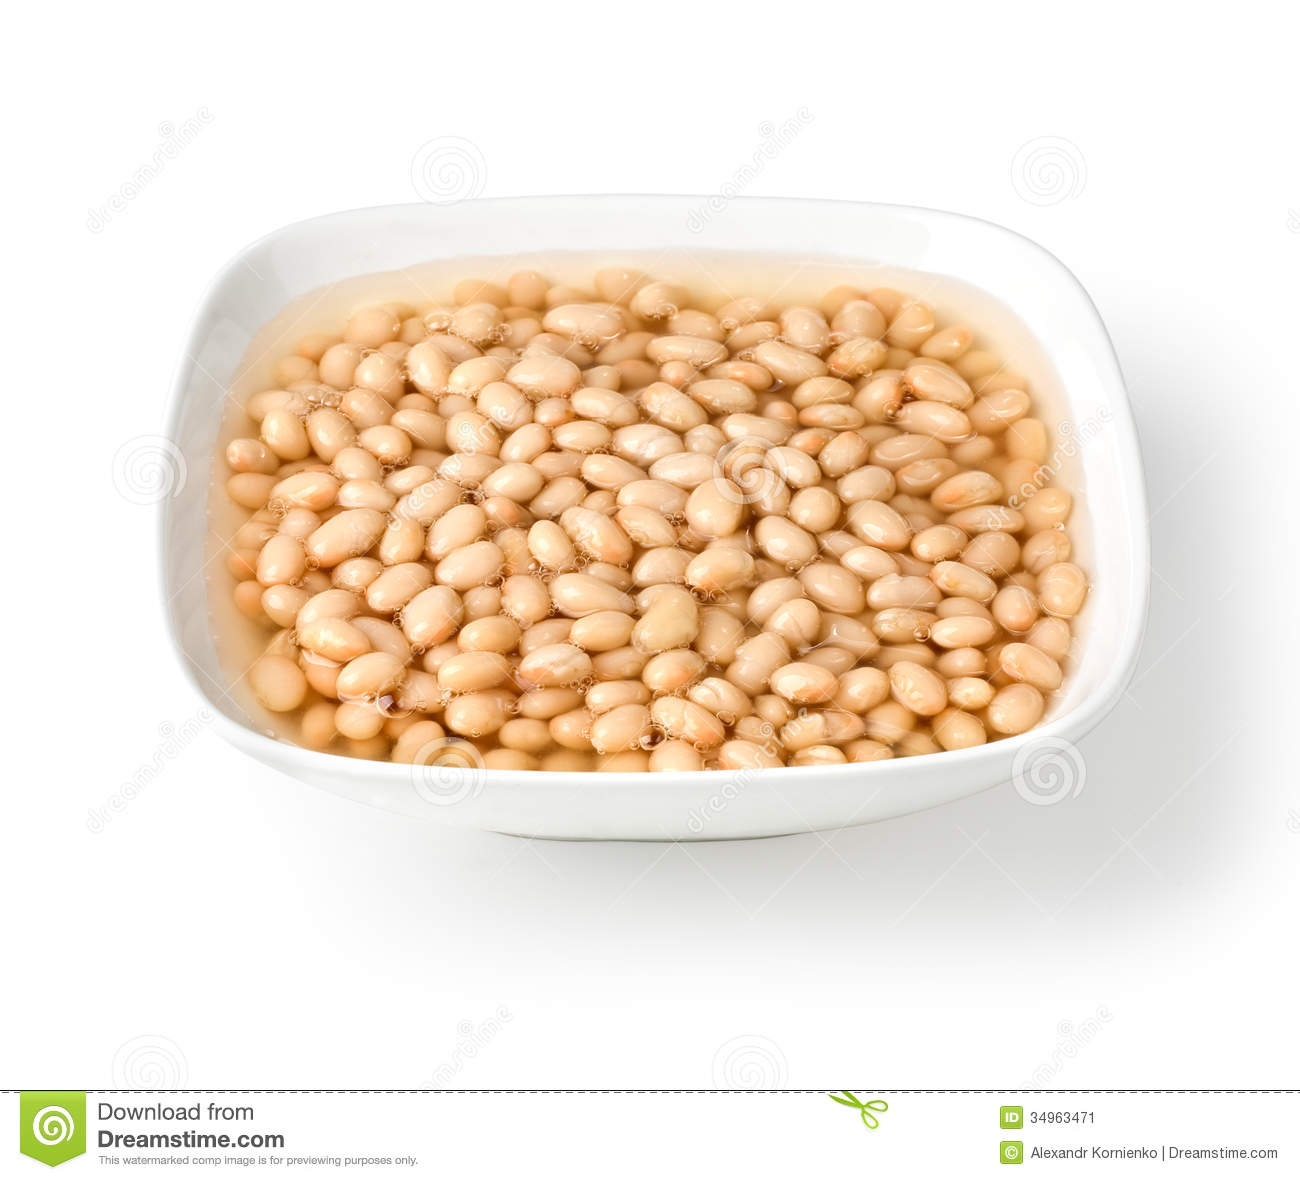 Canned Beans In Plate On White Background  With Clipping Path 